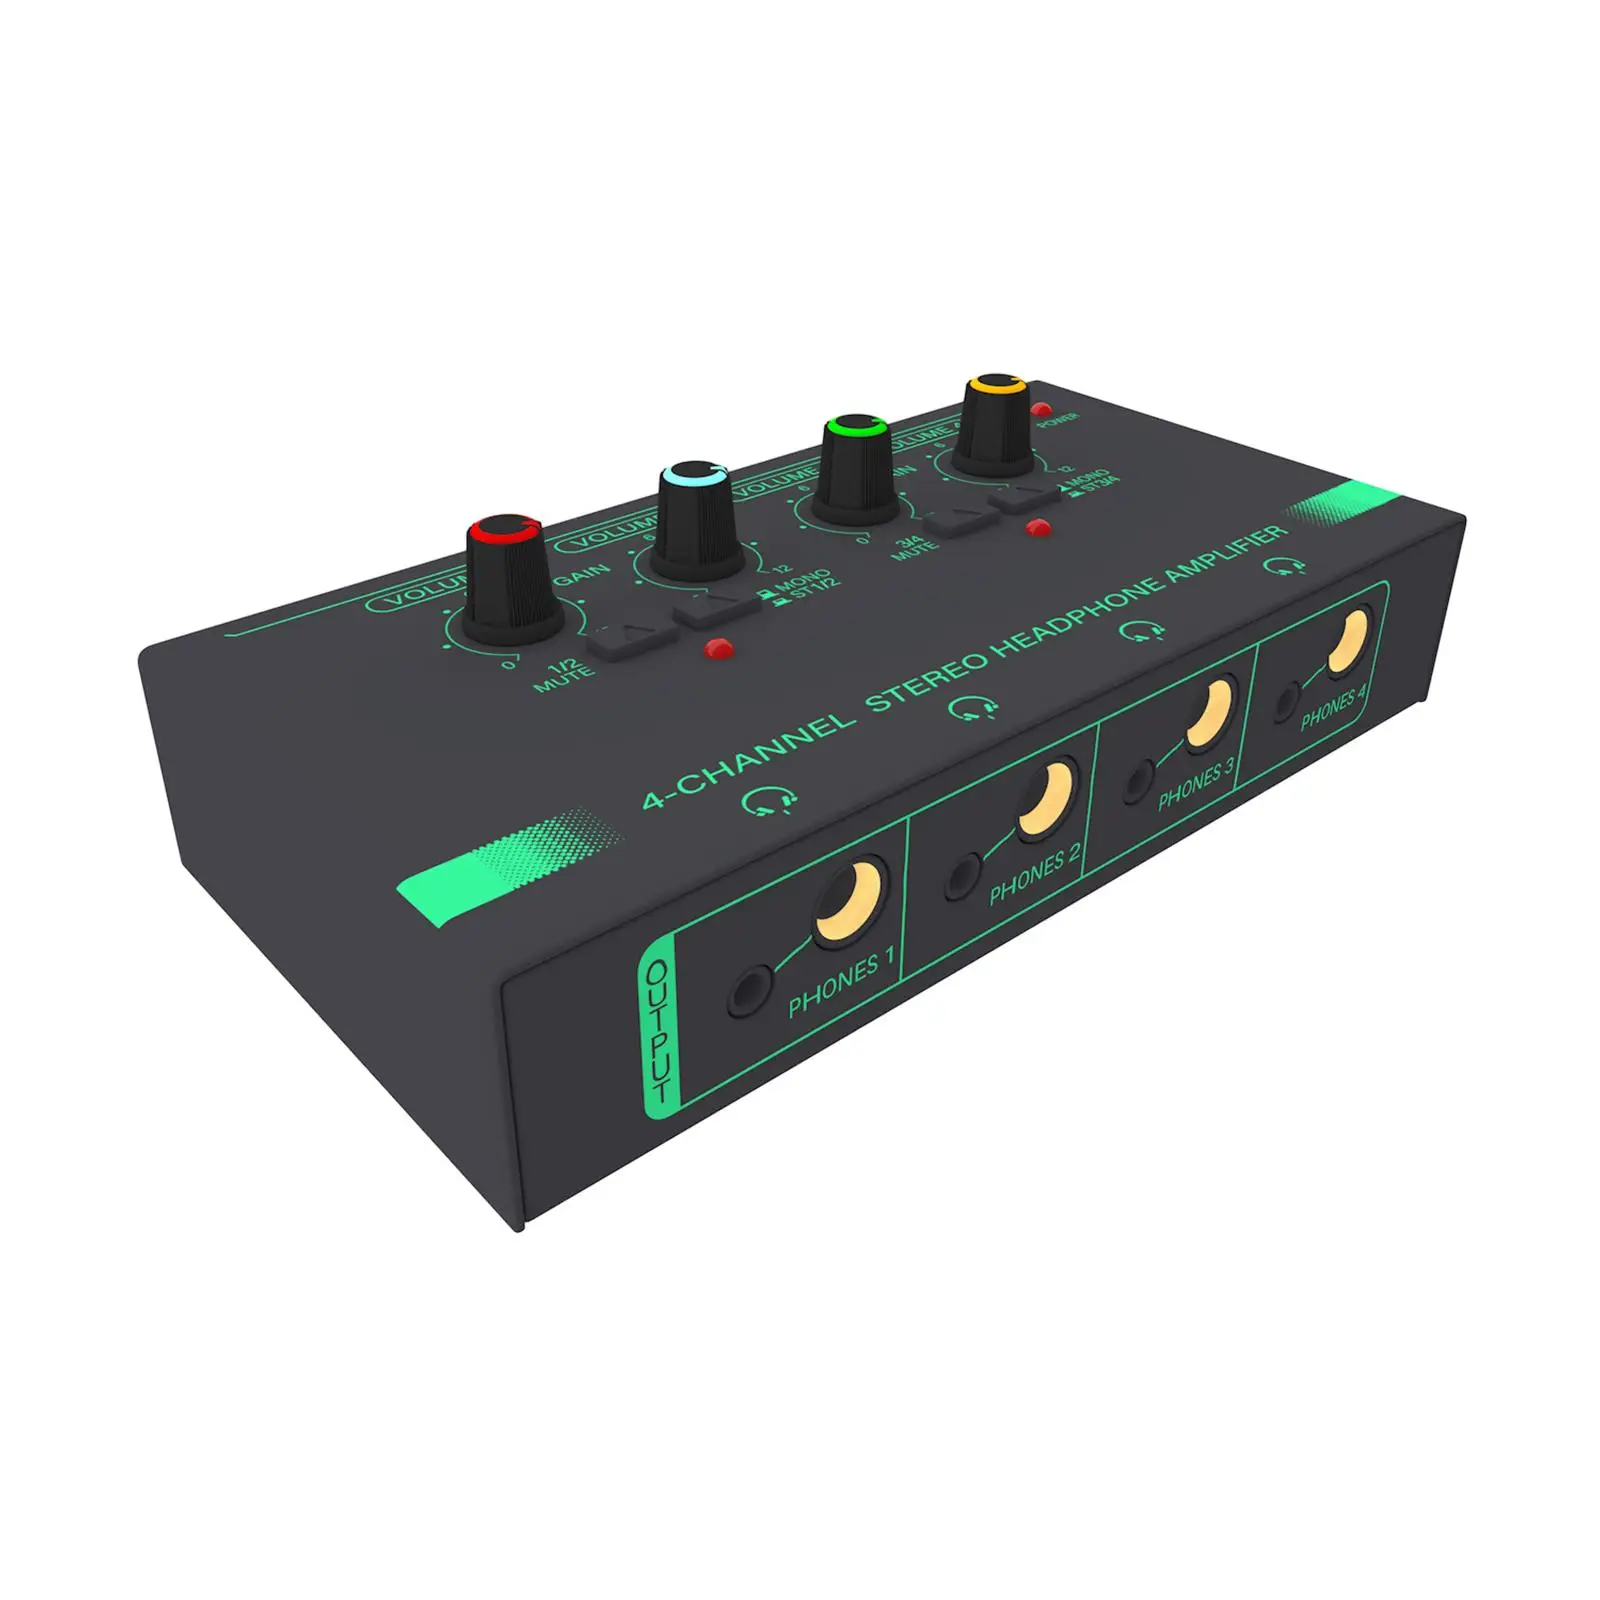 4 Channel Mini Stereo Headphone Amplifier Separate Volume Controls Stereo Dispenser for Studio and Stage Application Compact